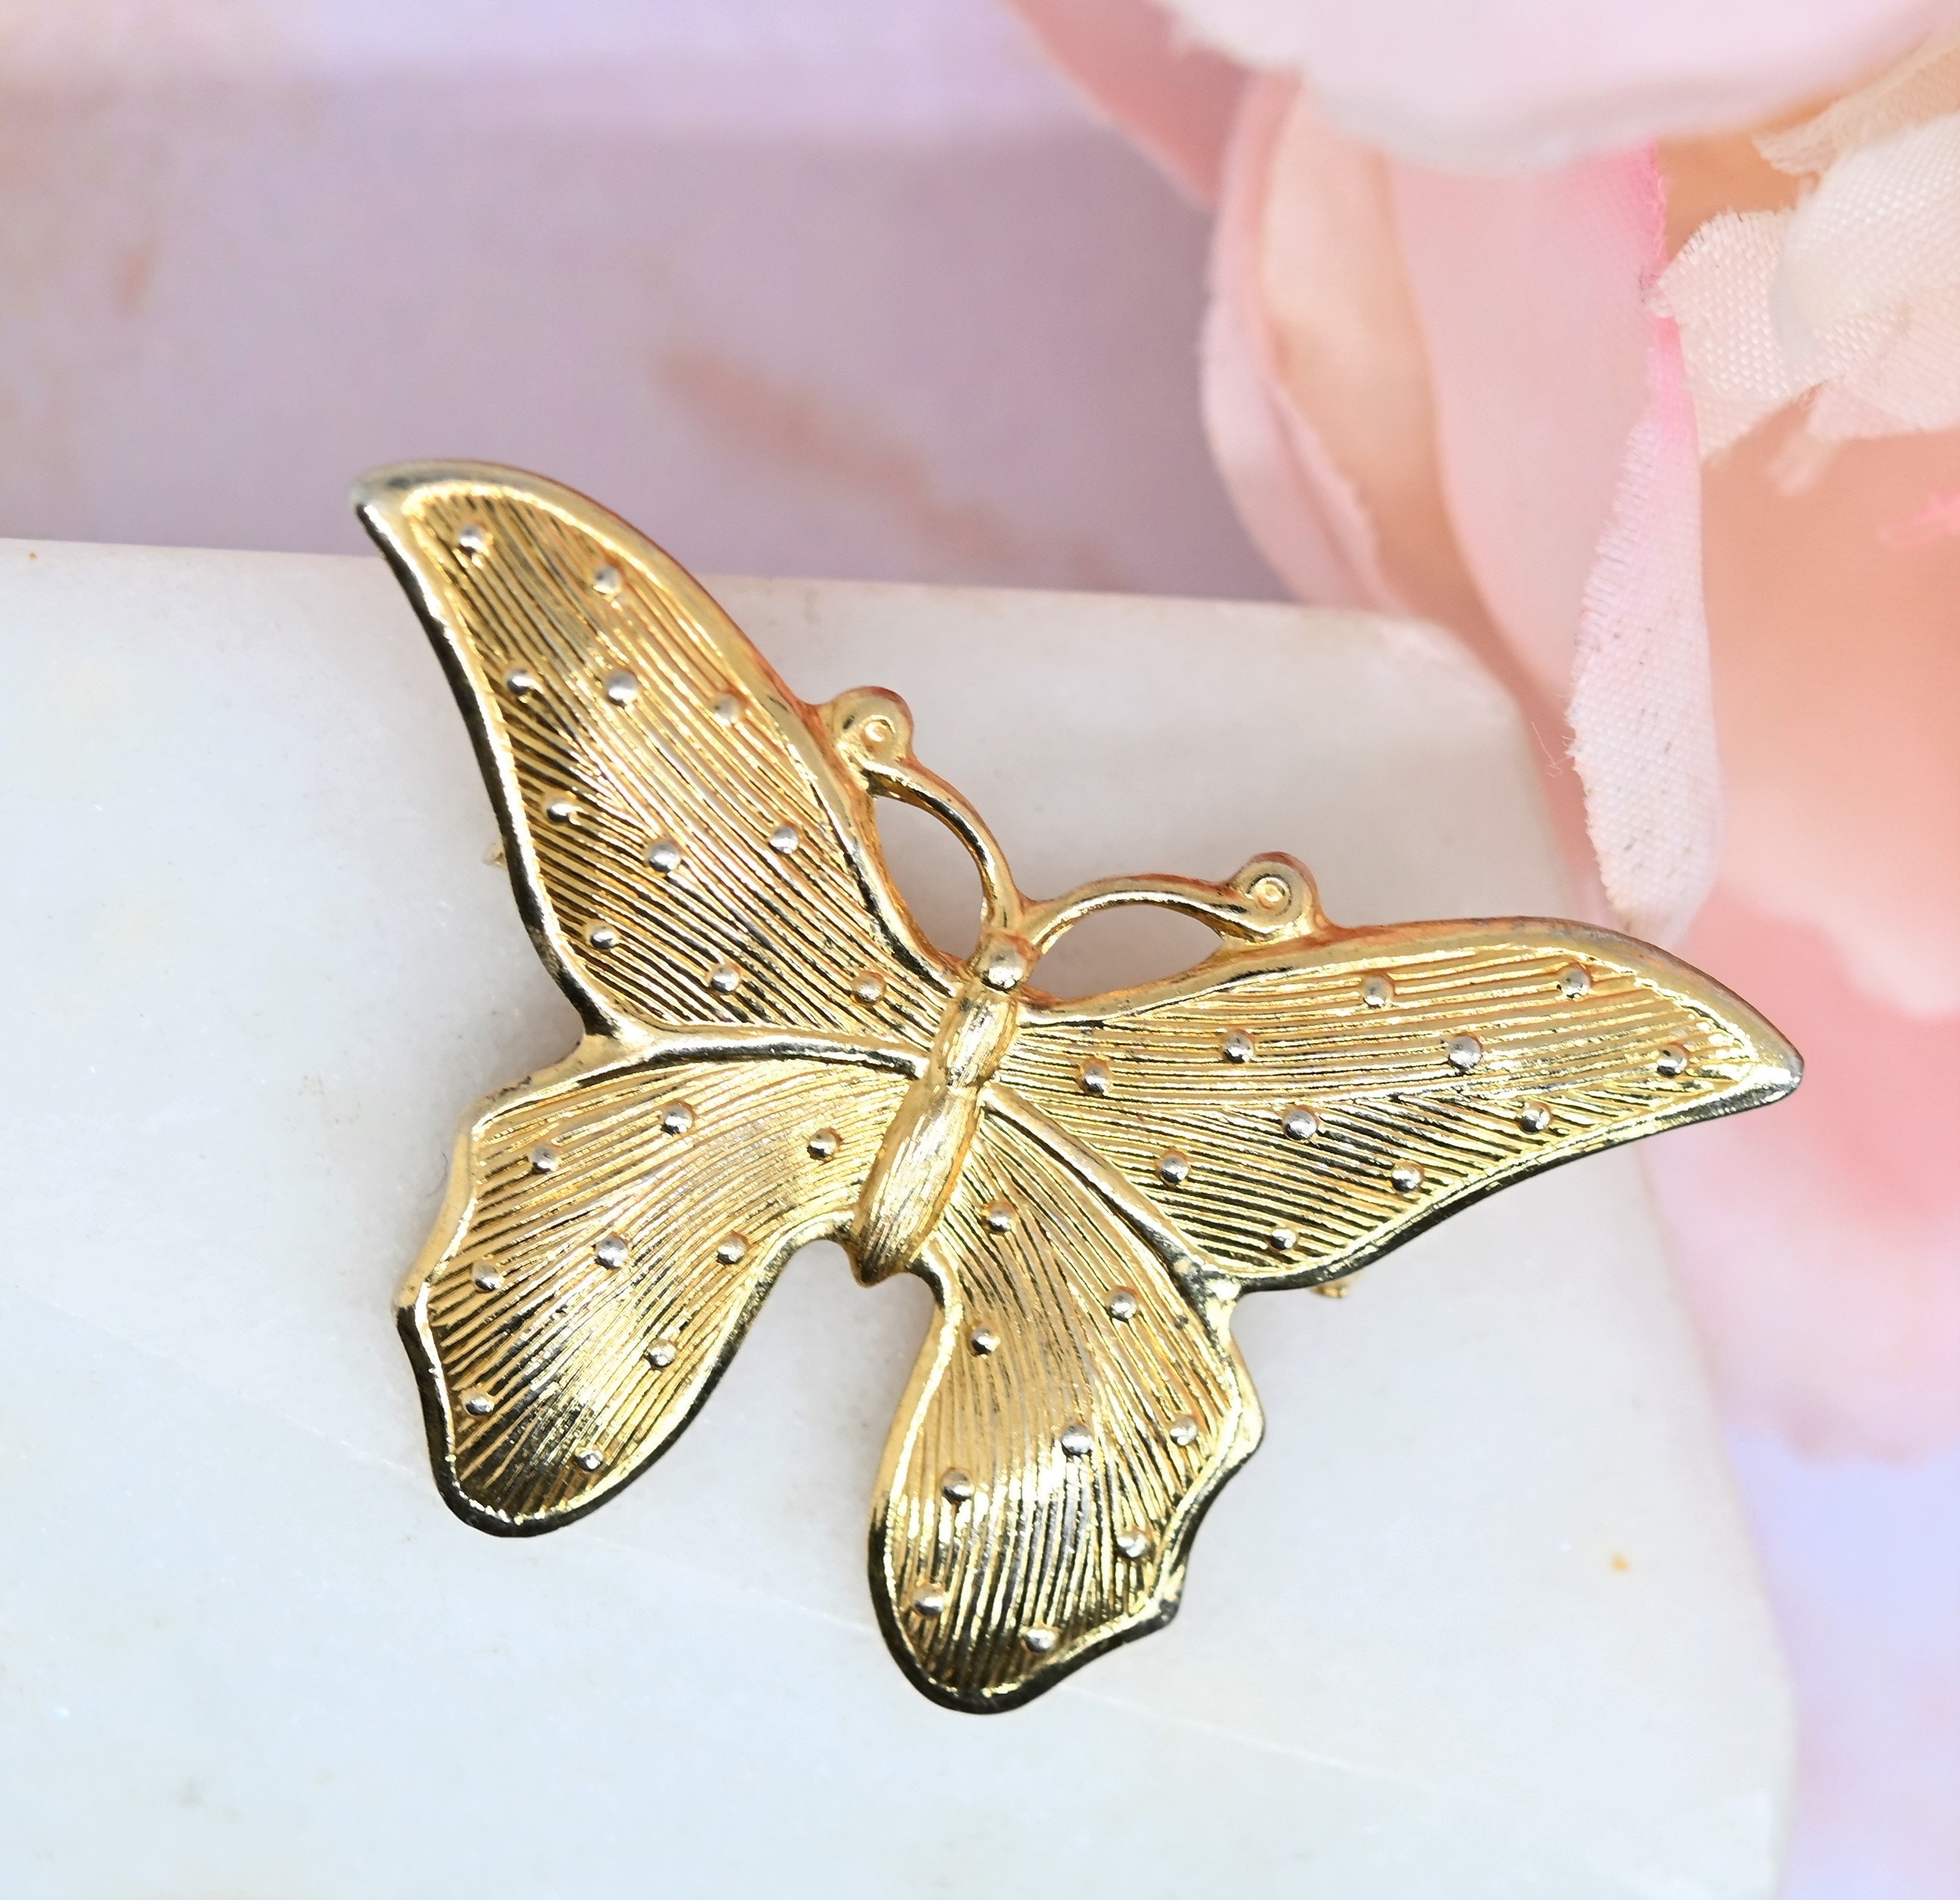 jewelry - How can I convert a stick pin badge to a butterfly clasp? - Arts  & Crafts Stack Exchange